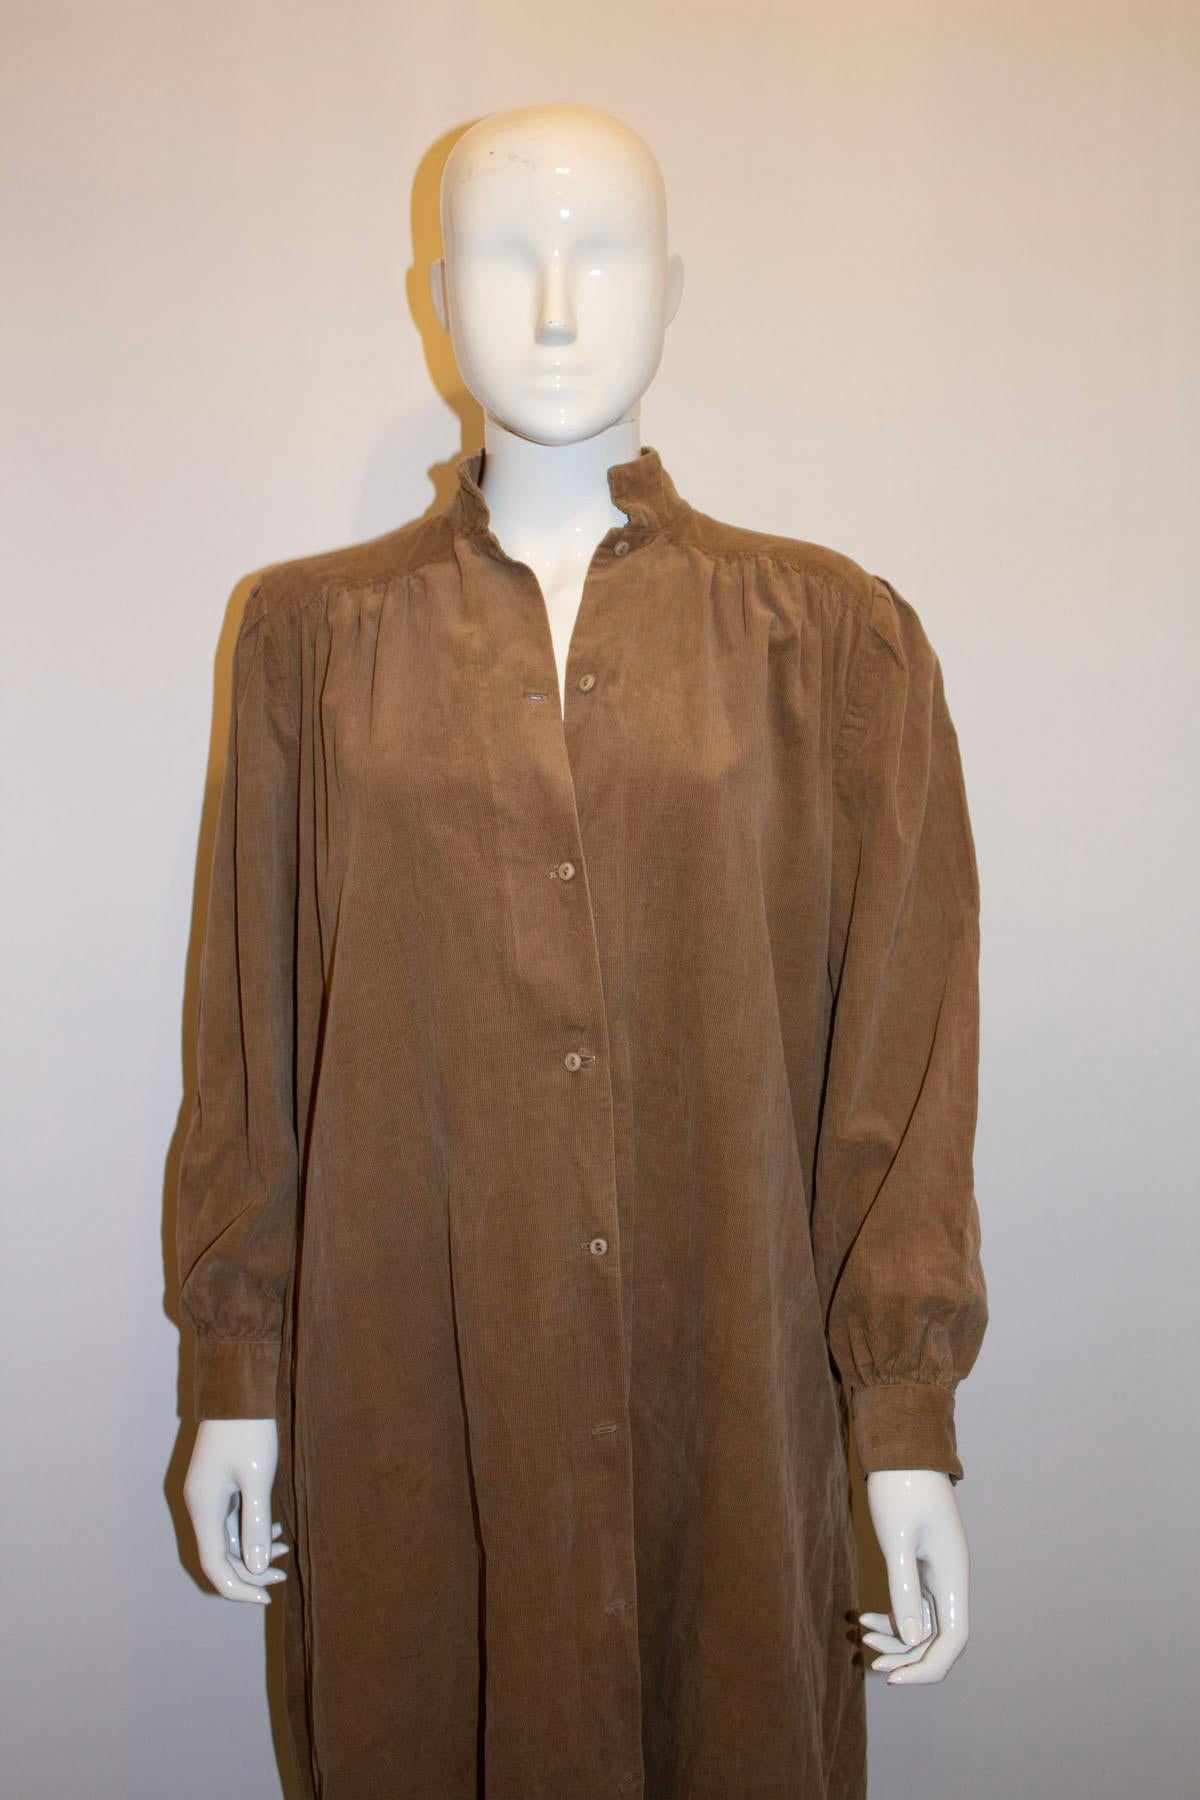 A great vintage dress for Fall by Monsoon. The dress is in a beige corduroy cotton, and can be worn as a dress or an over dress. It has a stand up collar, button front opening and gathering on the shoulders. It has a 2 button cuff, pocket on either